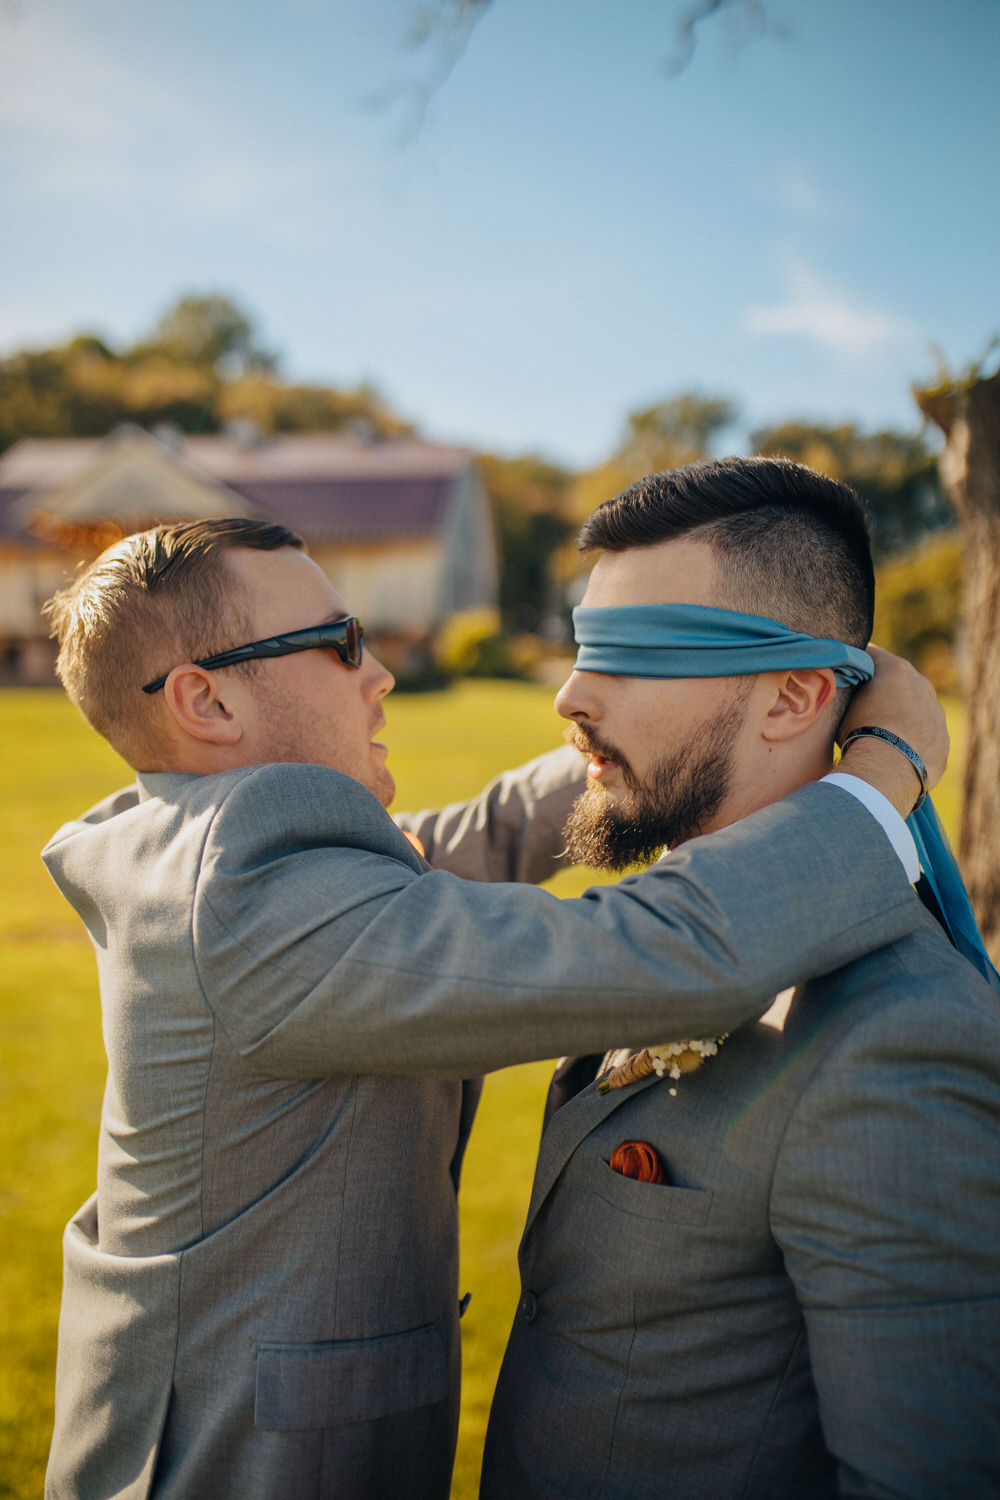 Celebrant being blindfolded by a friend for a first look.